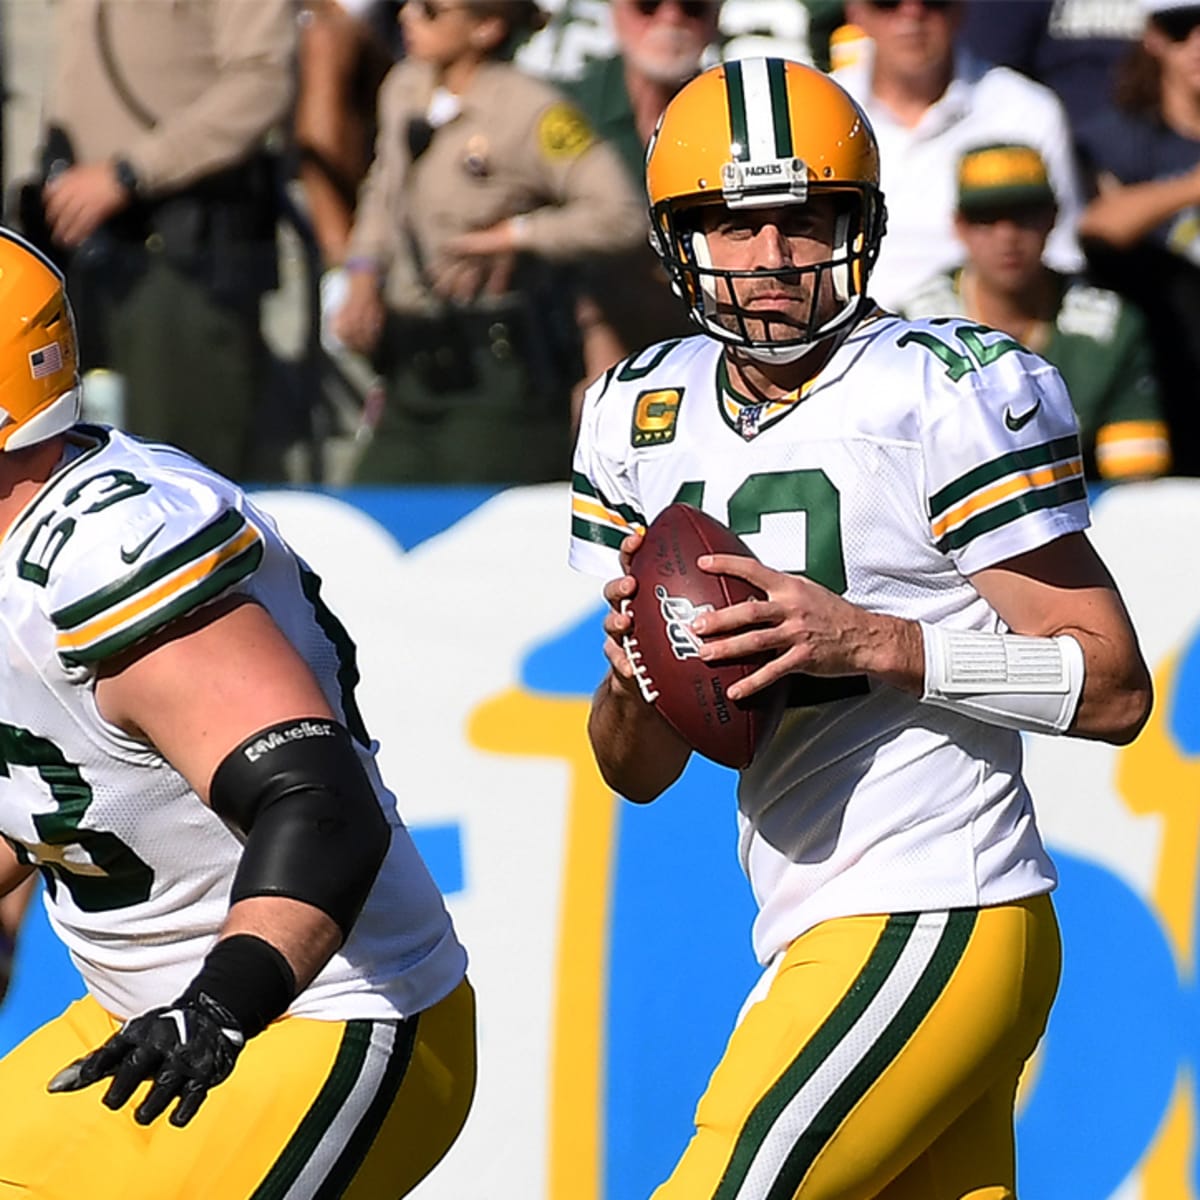 Washington vs. Packers live stream, time, TV info, how to watch, odds